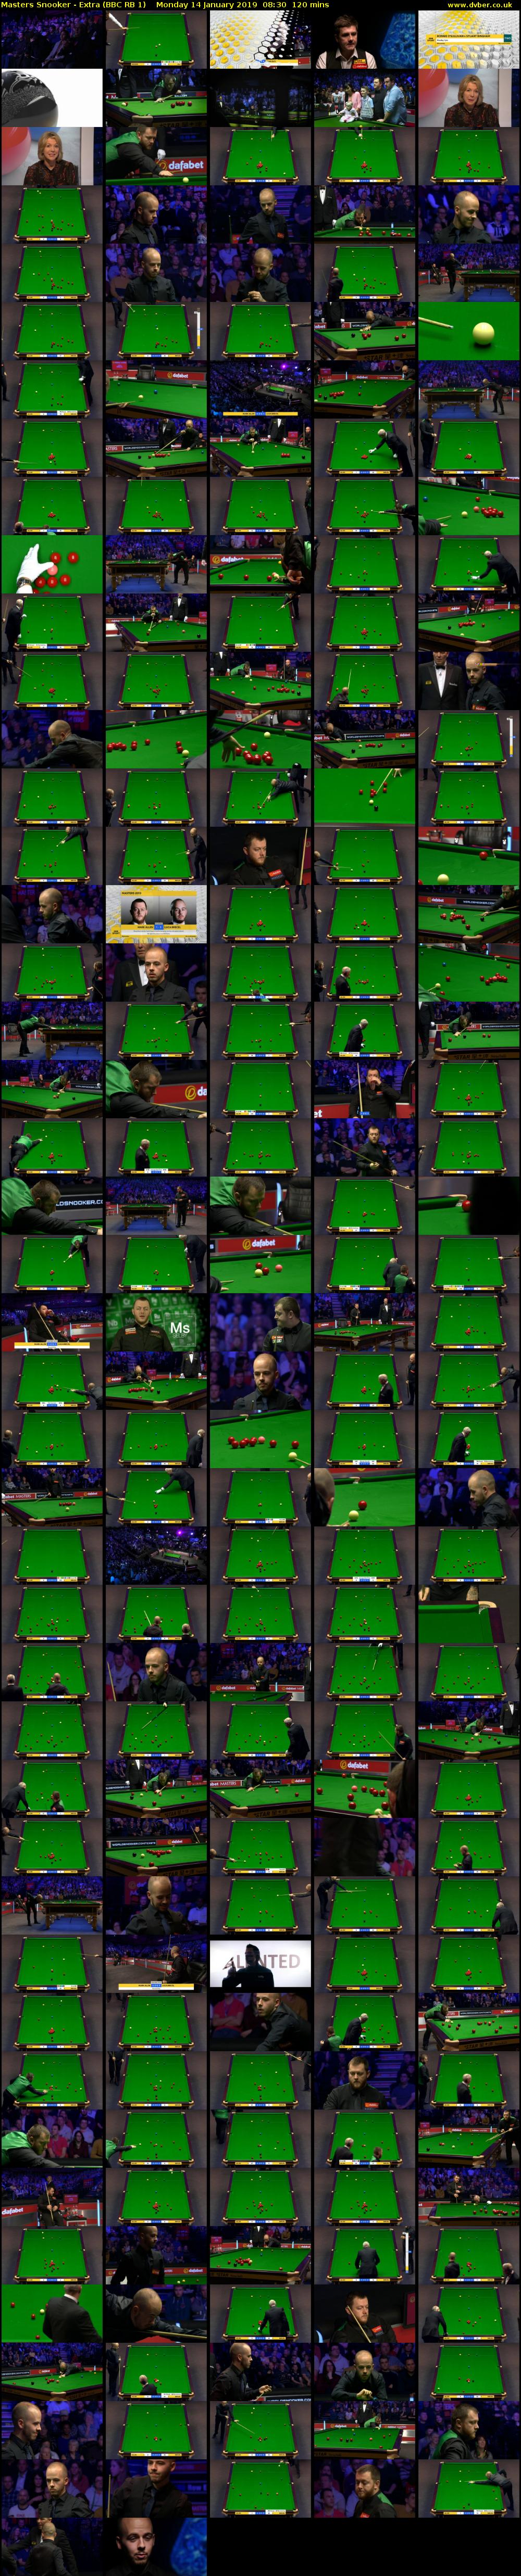 Masters Snooker - Extra (BBC RB 1) Monday 14 January 2019 08:30 - 10:30